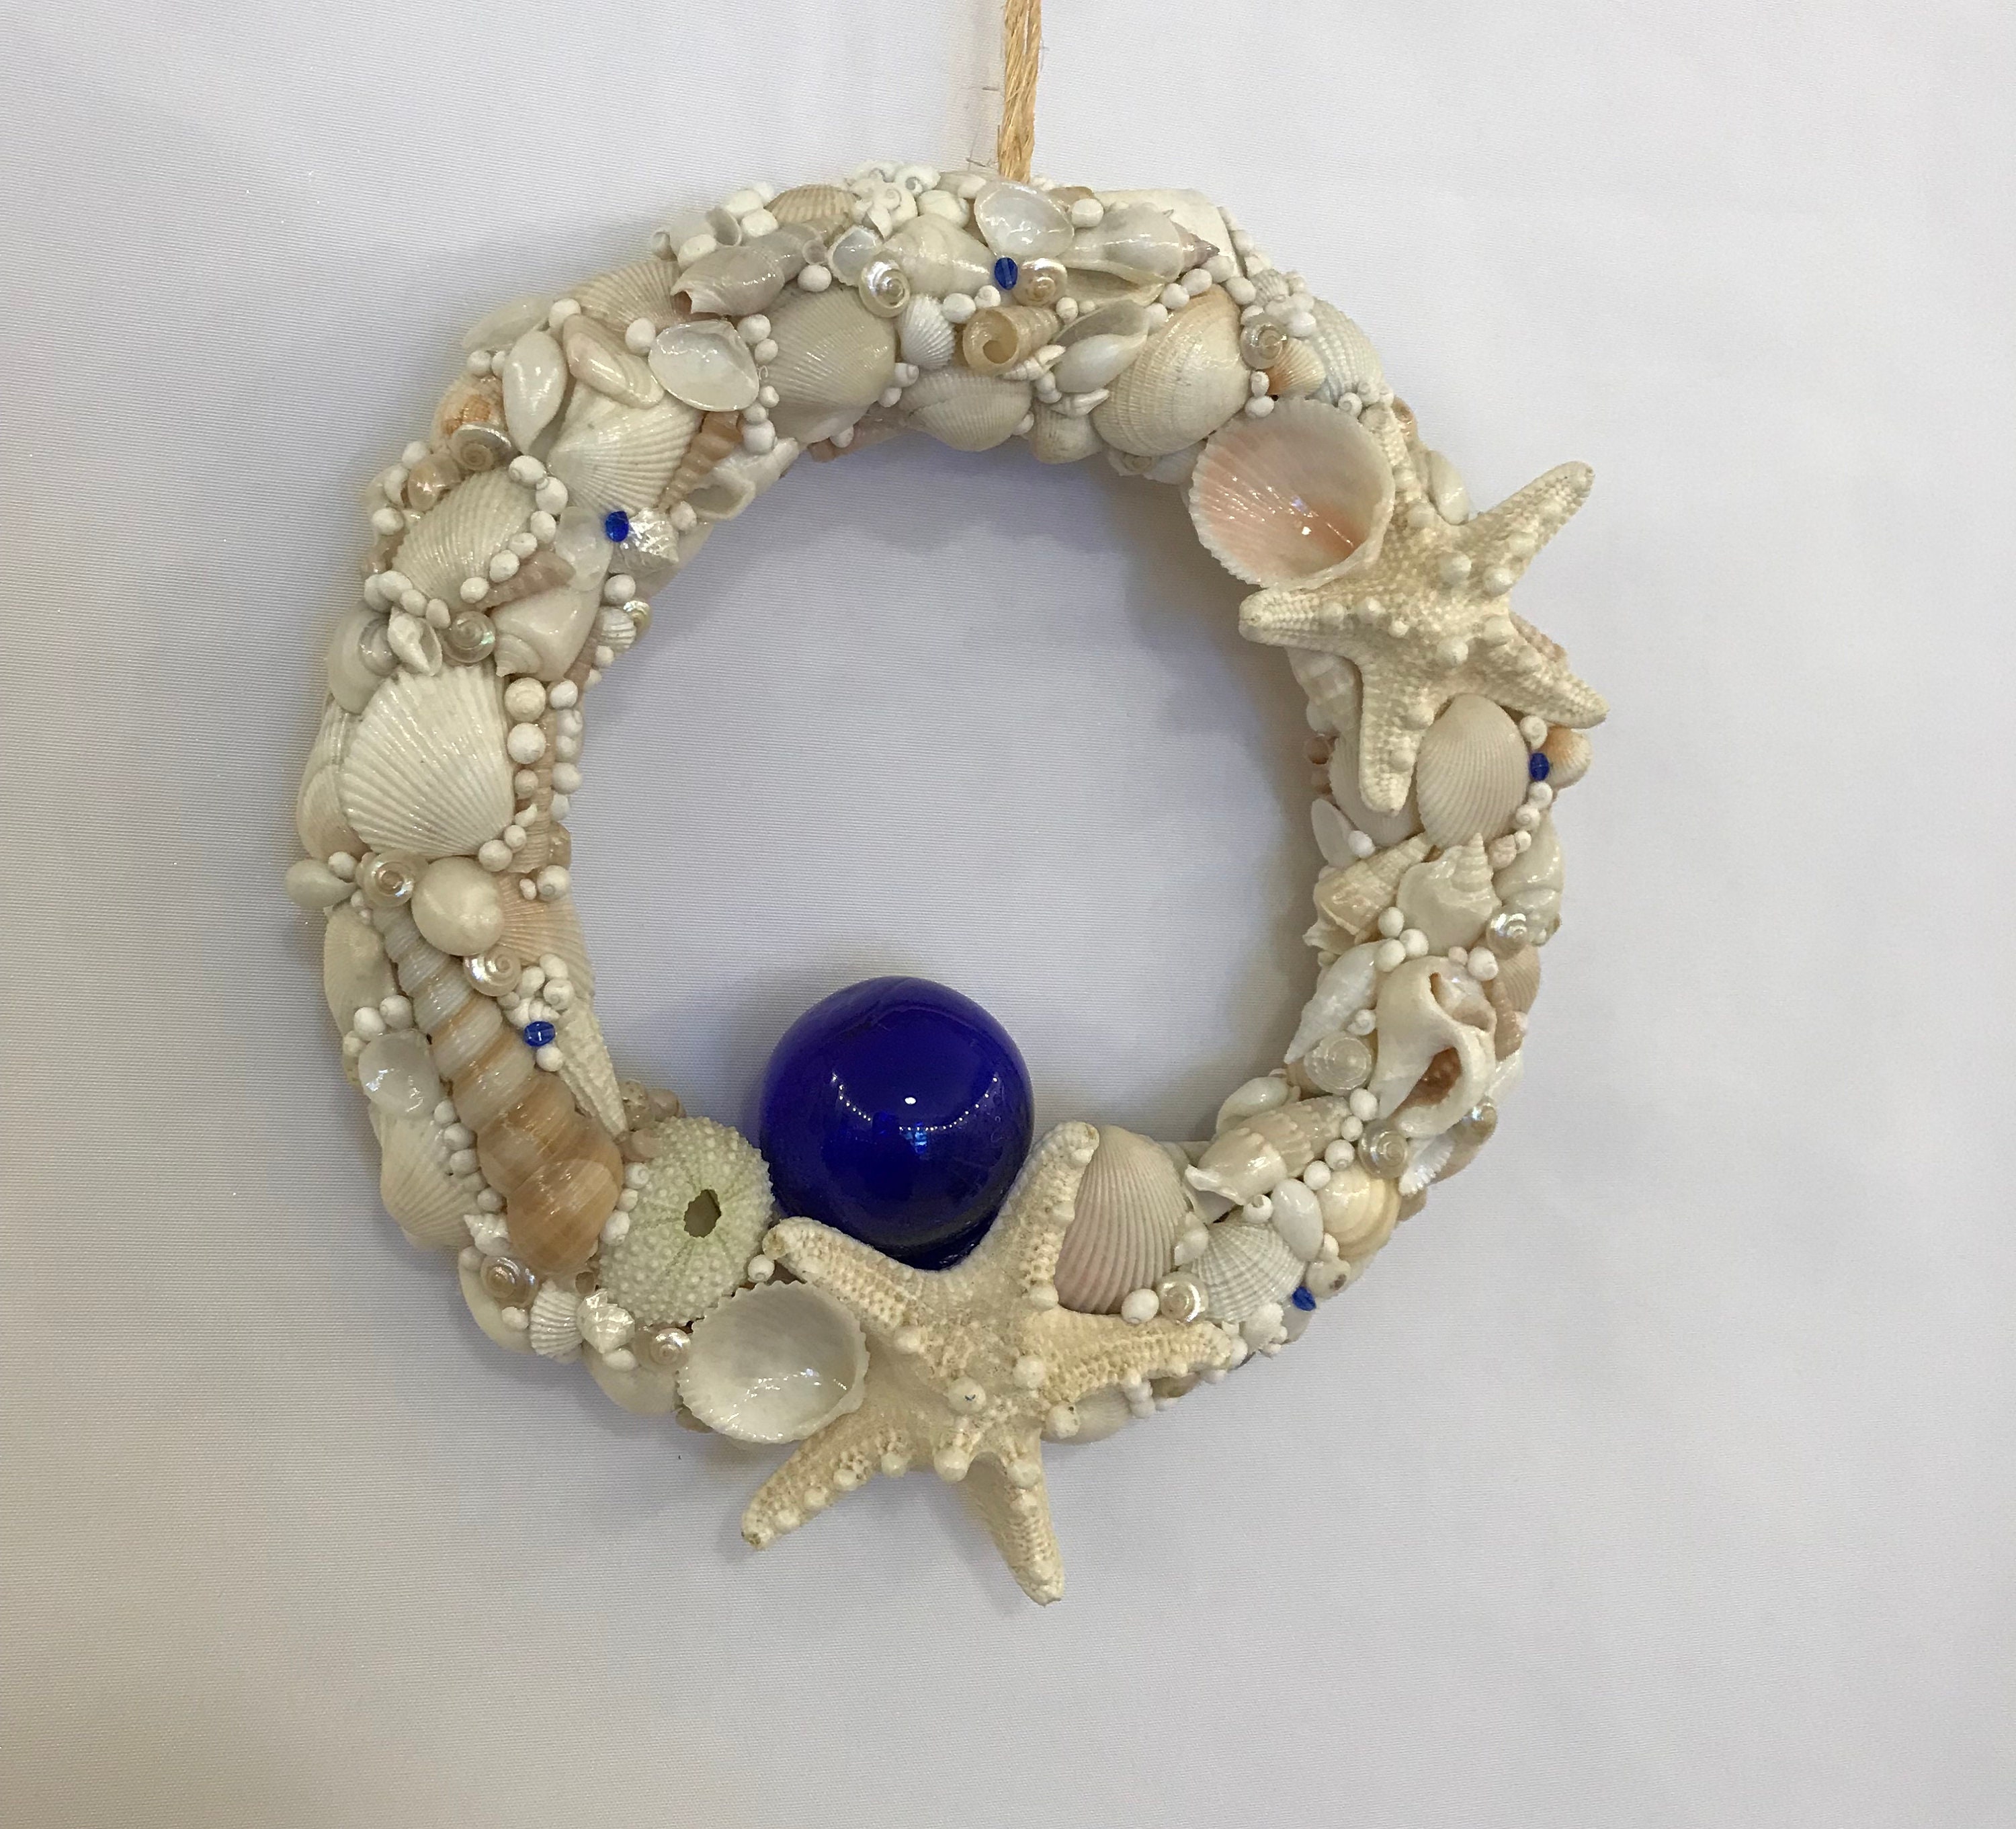 Seashell & Starfish Wreath with Cobalt Blue Glass Float | Etsy